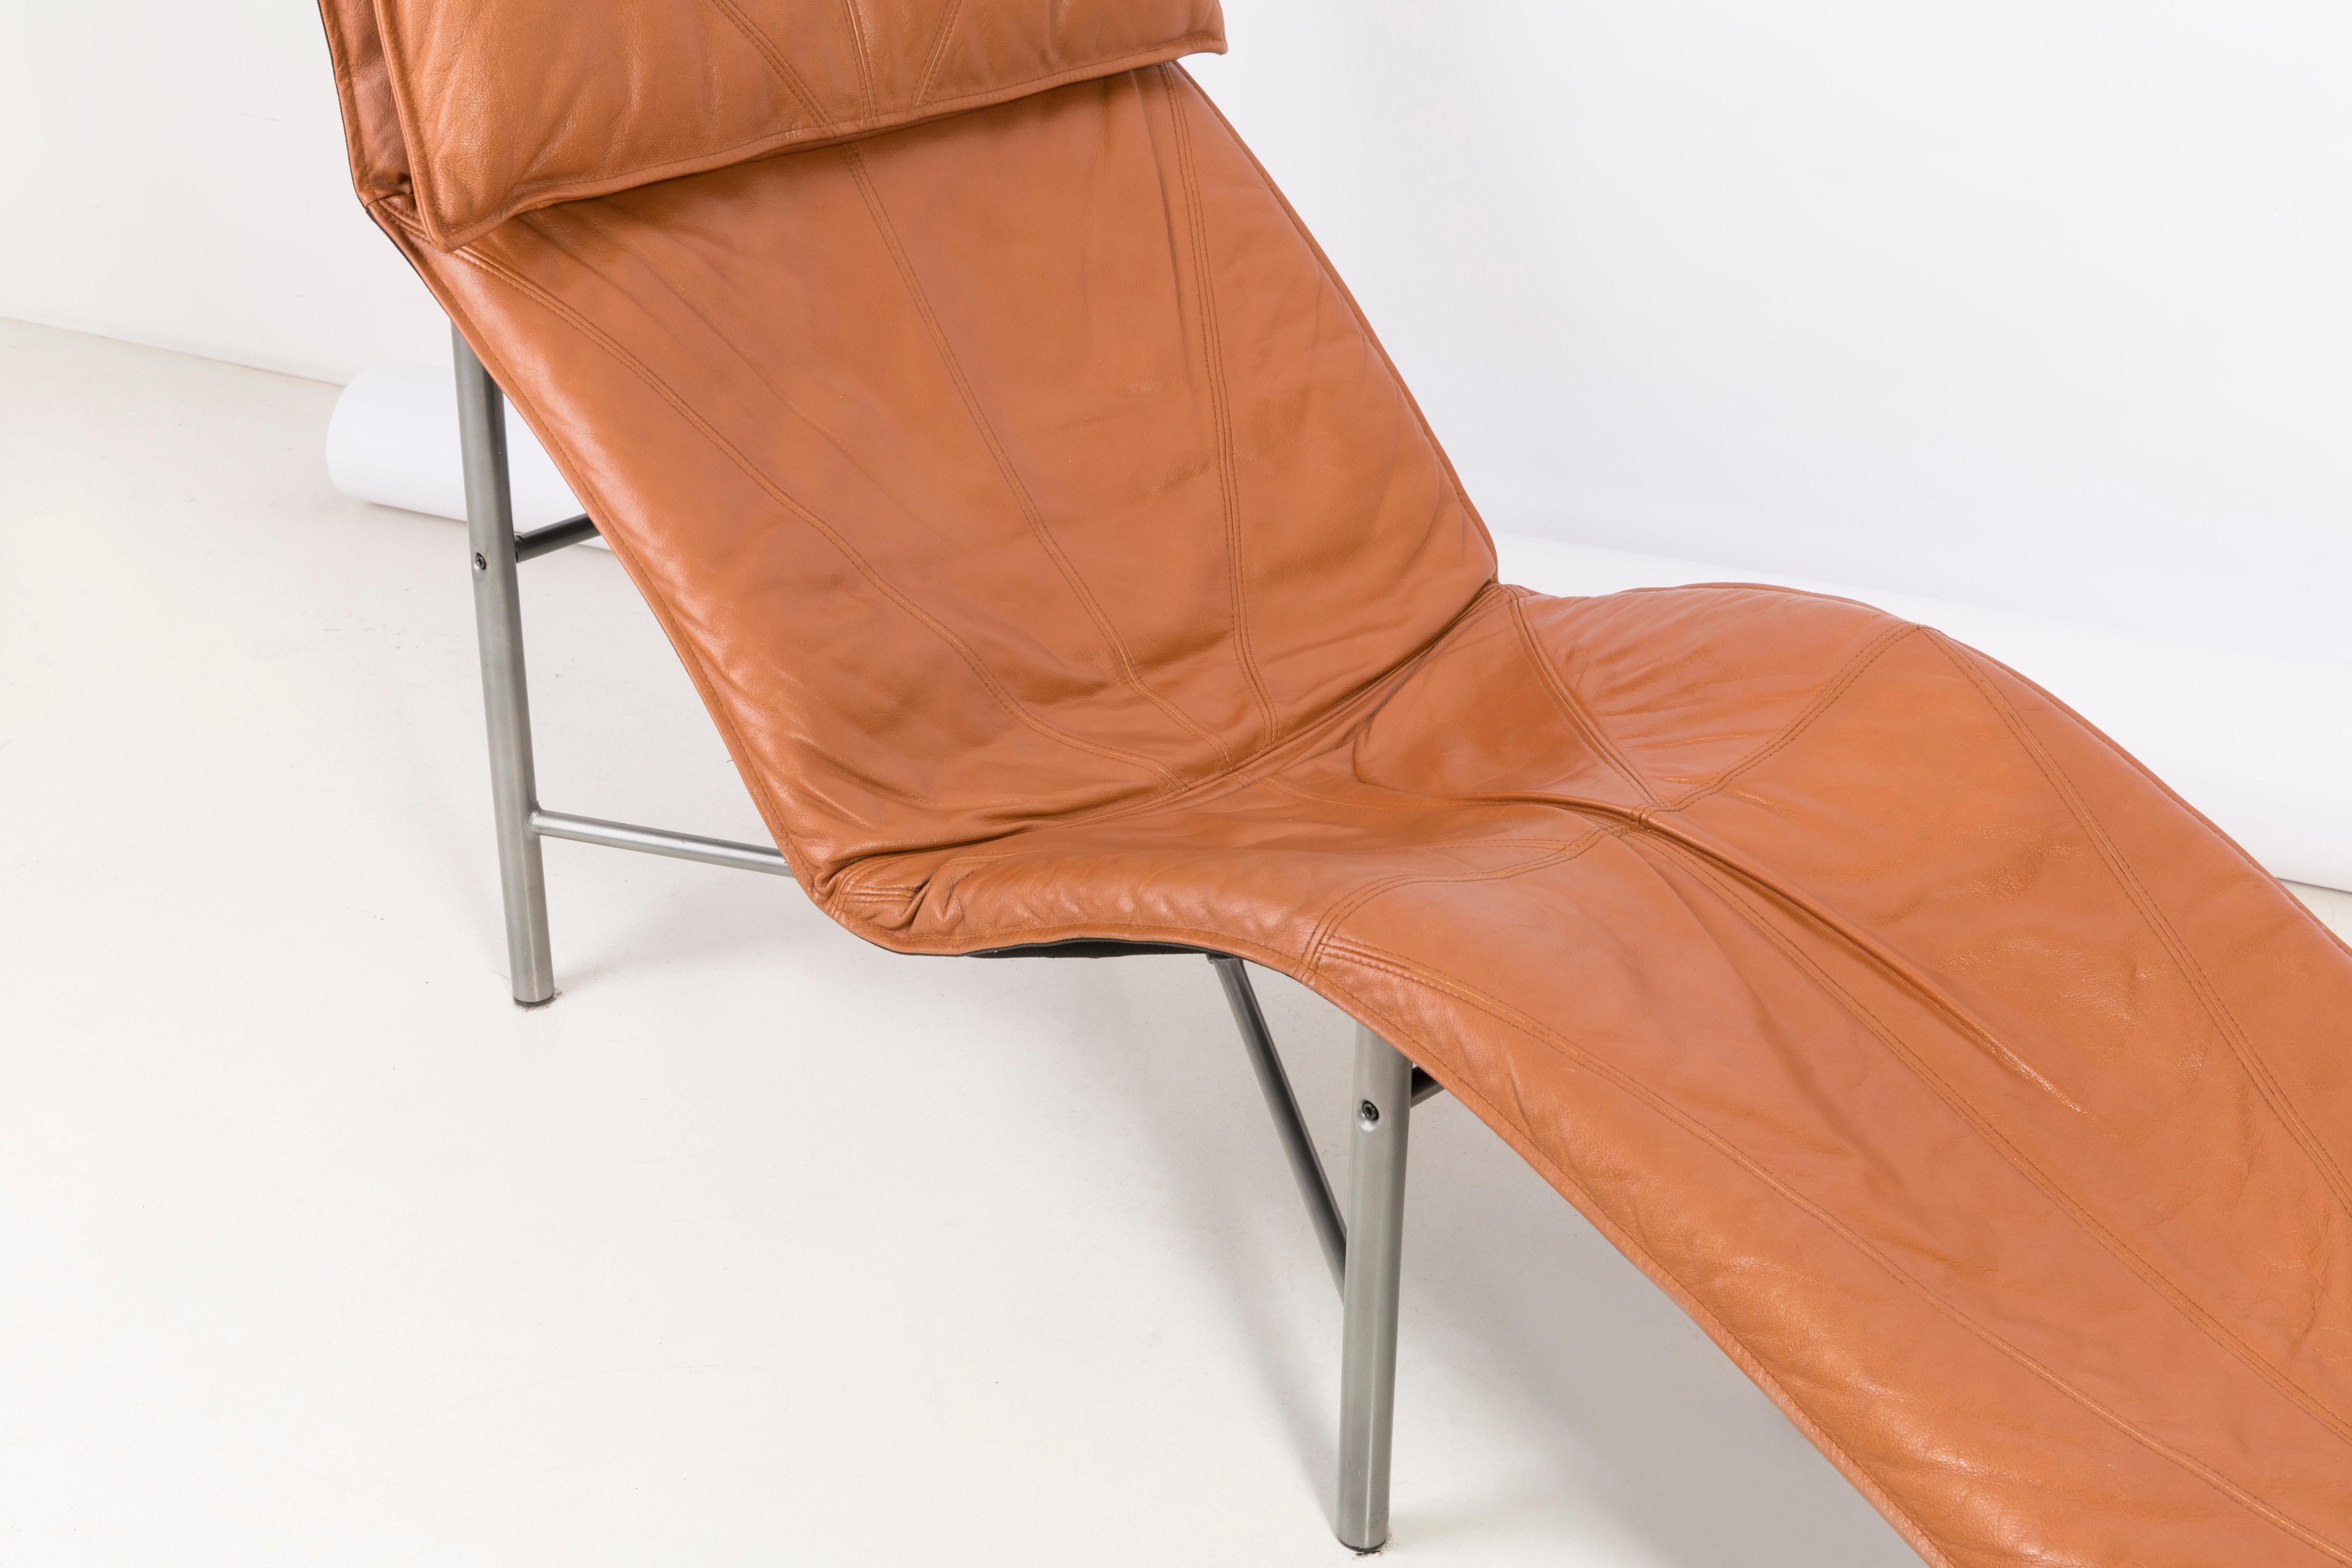 Swedish Two Midcentury Danish Modern Leather Chaise Lounge Chairs, Tord Björklund, 1980 For Sale